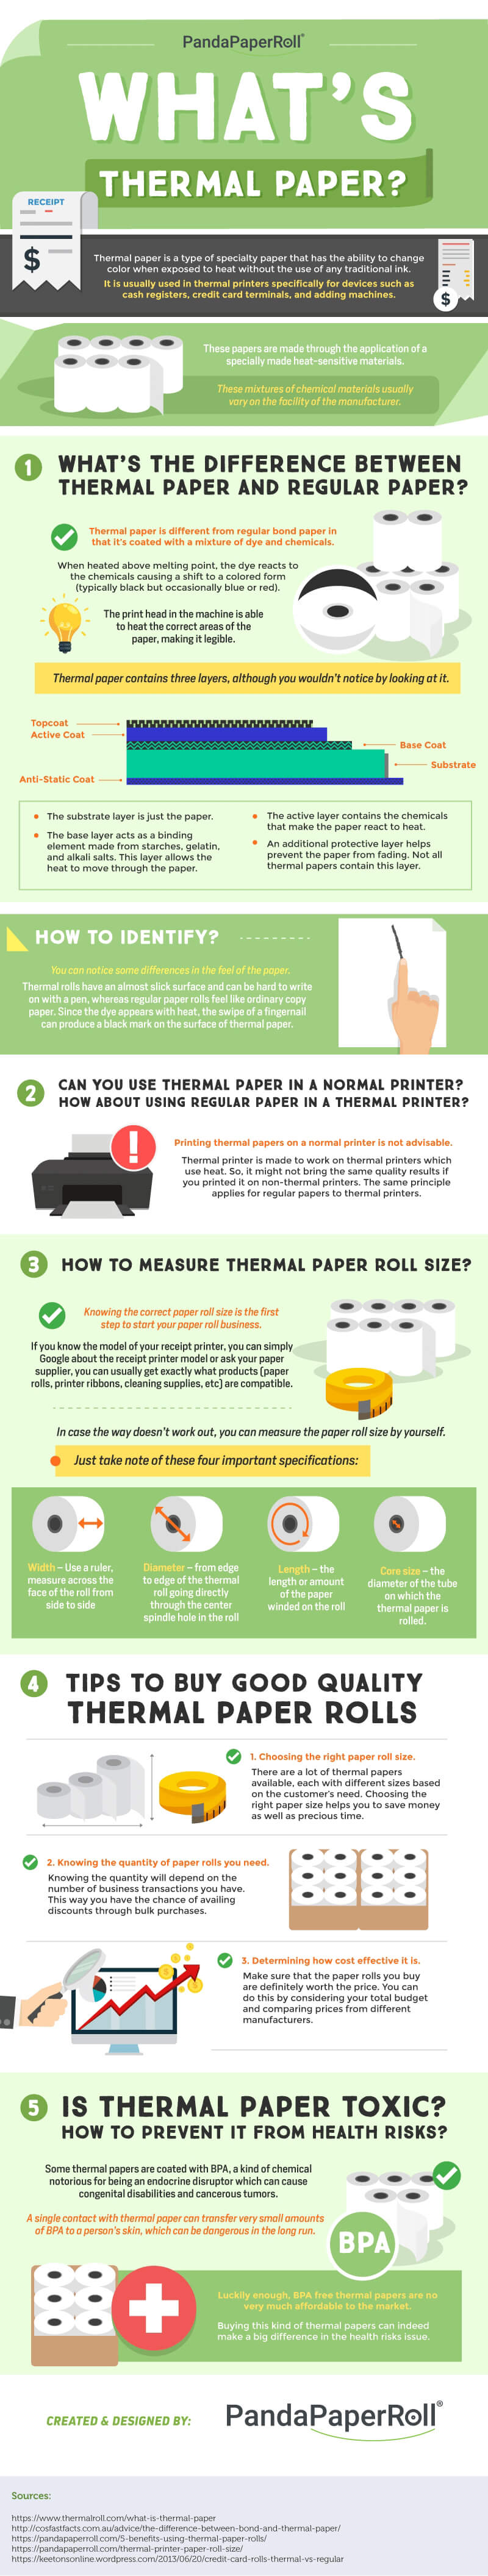 What's Thermal Paper - Infographic